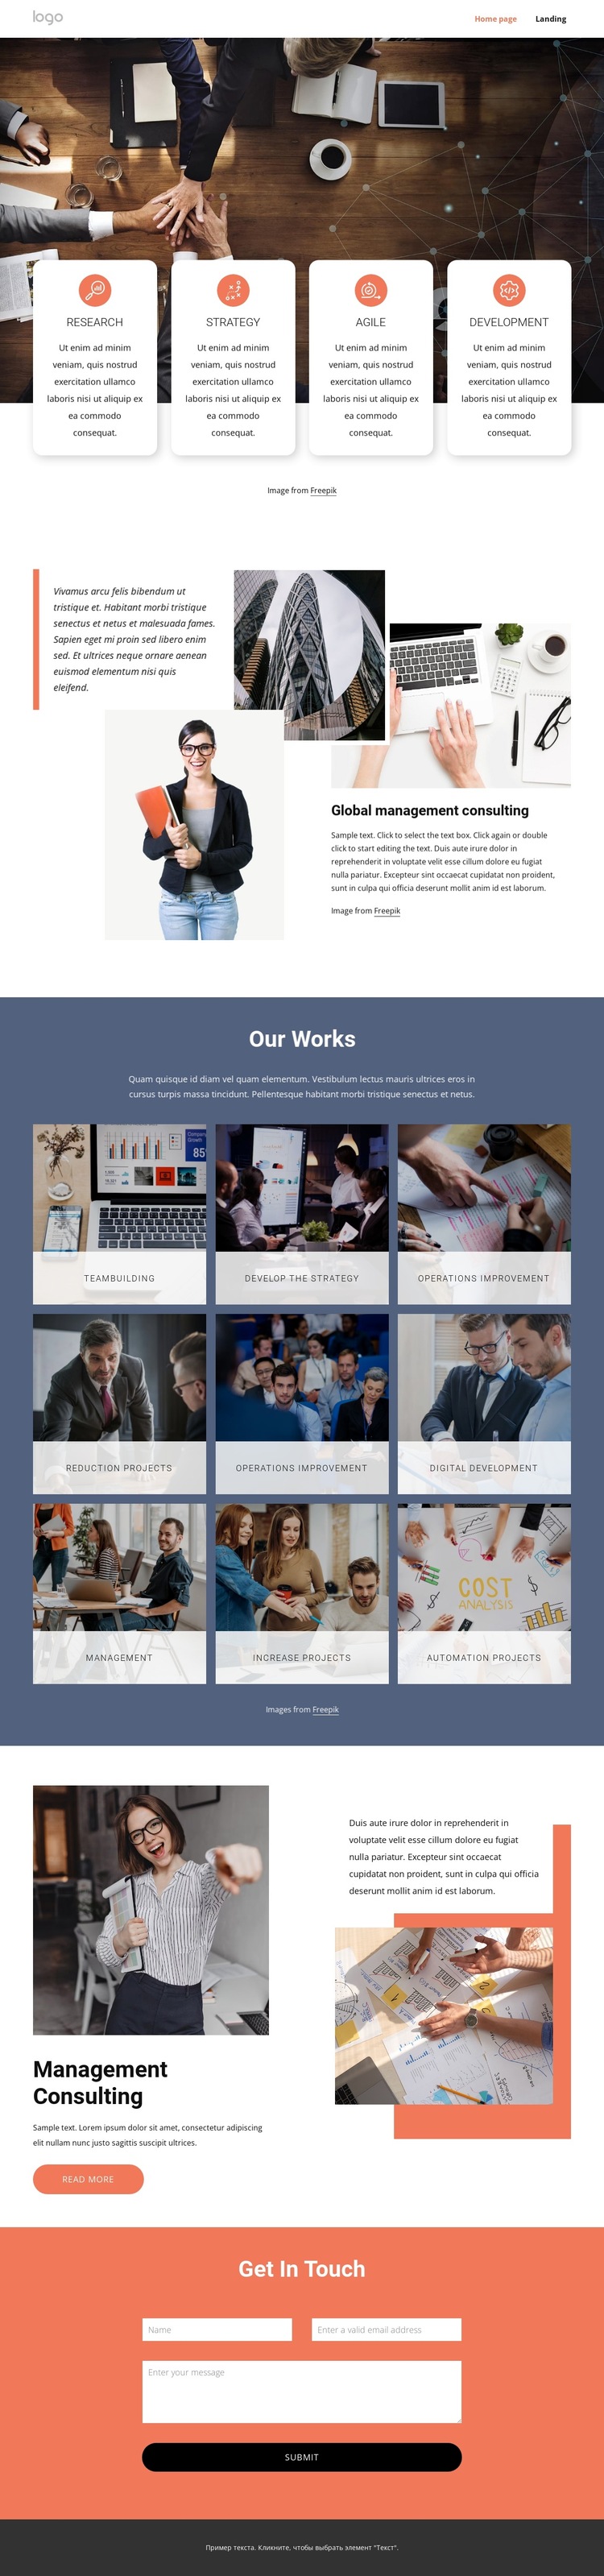 The leading consulting firms for management services HTML5 Template